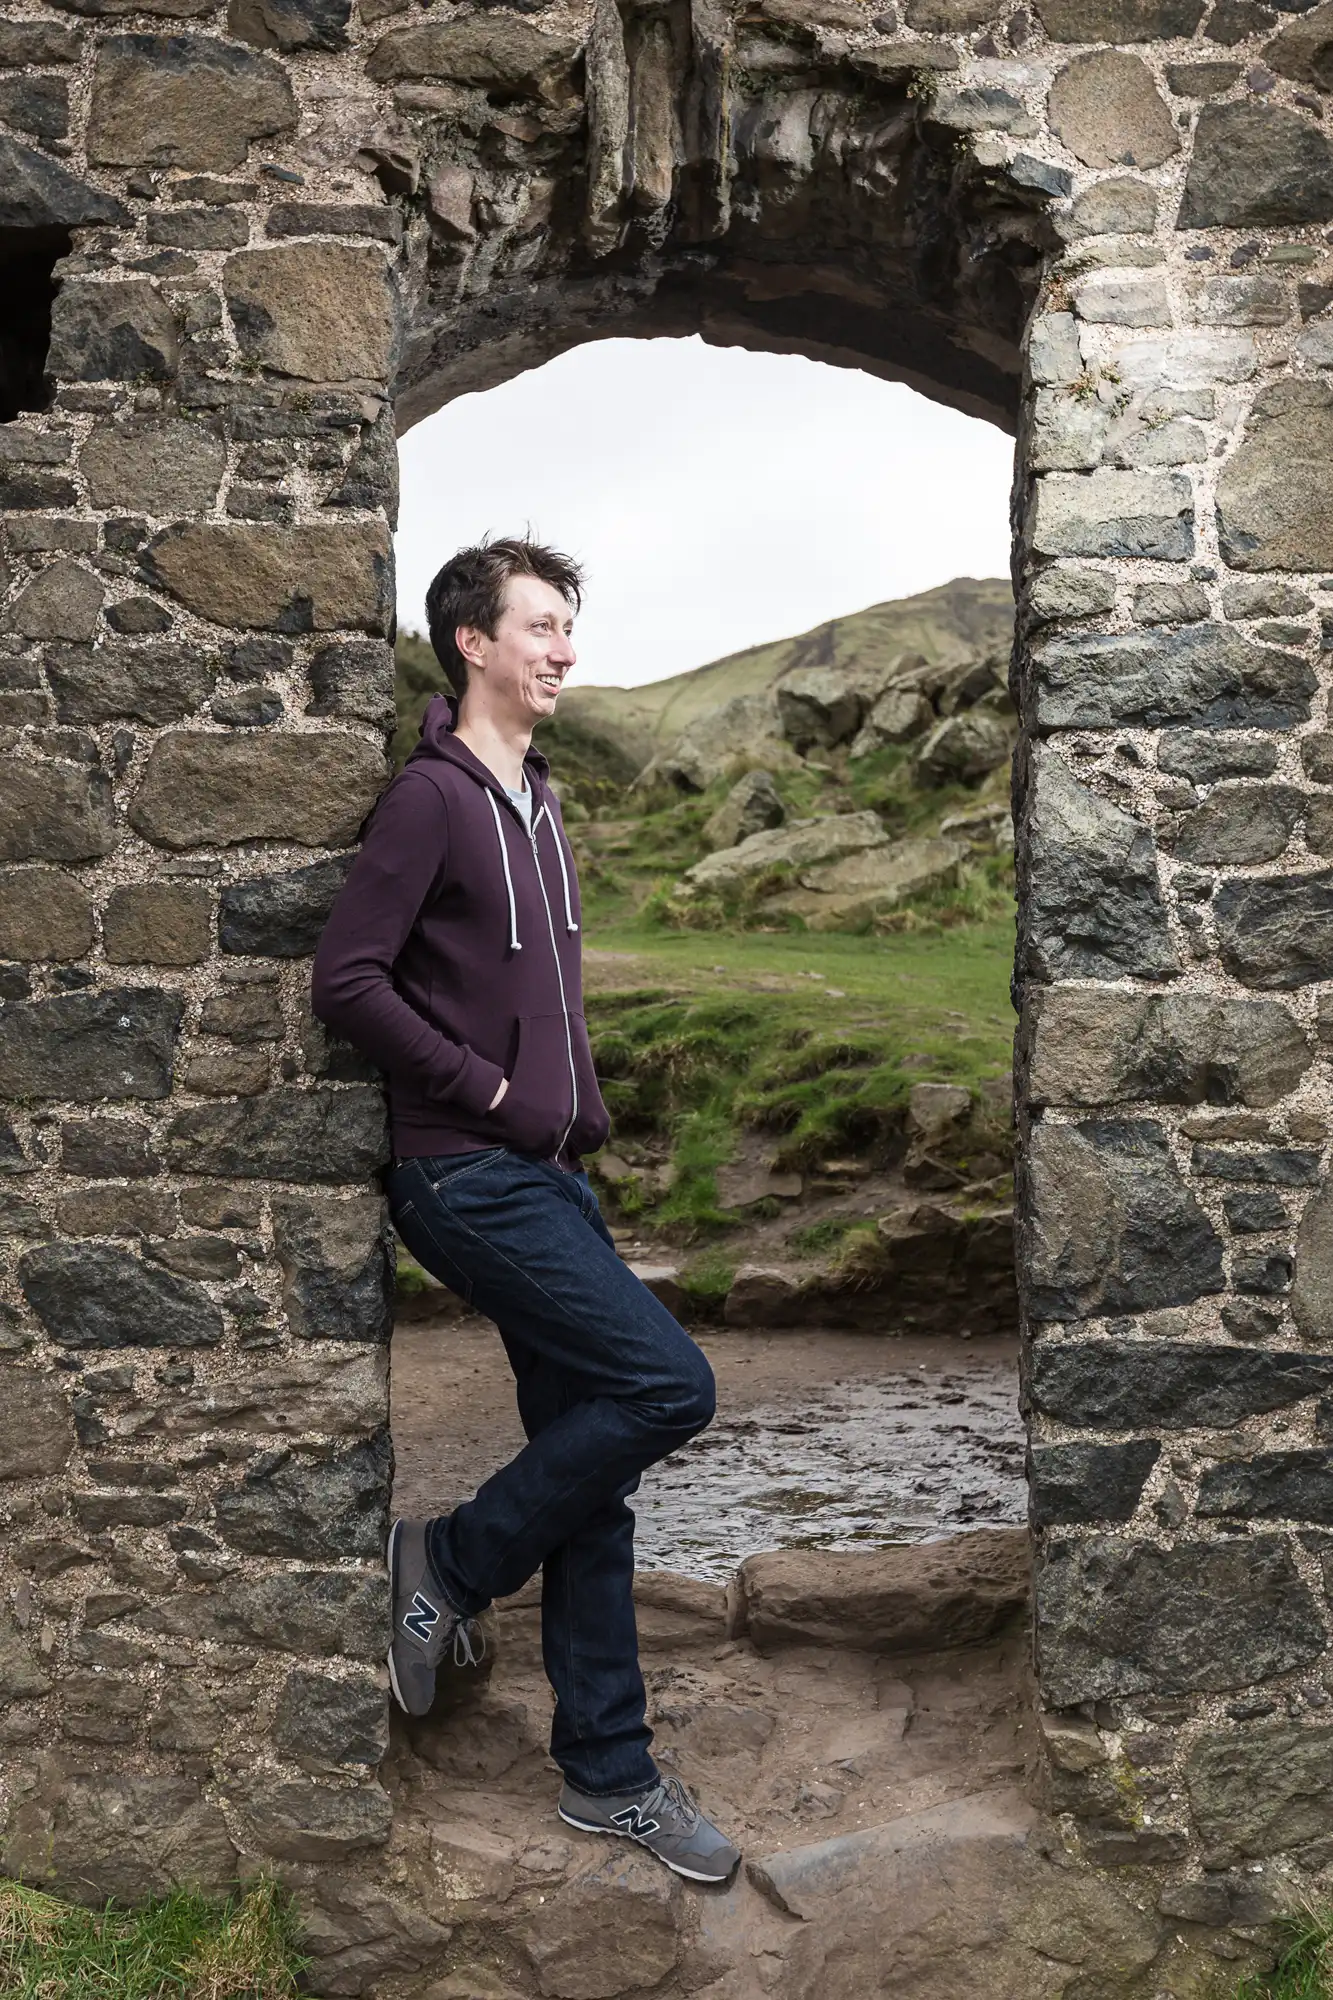 A man in a purple hoodie leans casually in an arched stone doorway, looking out onto a grassy landscape.